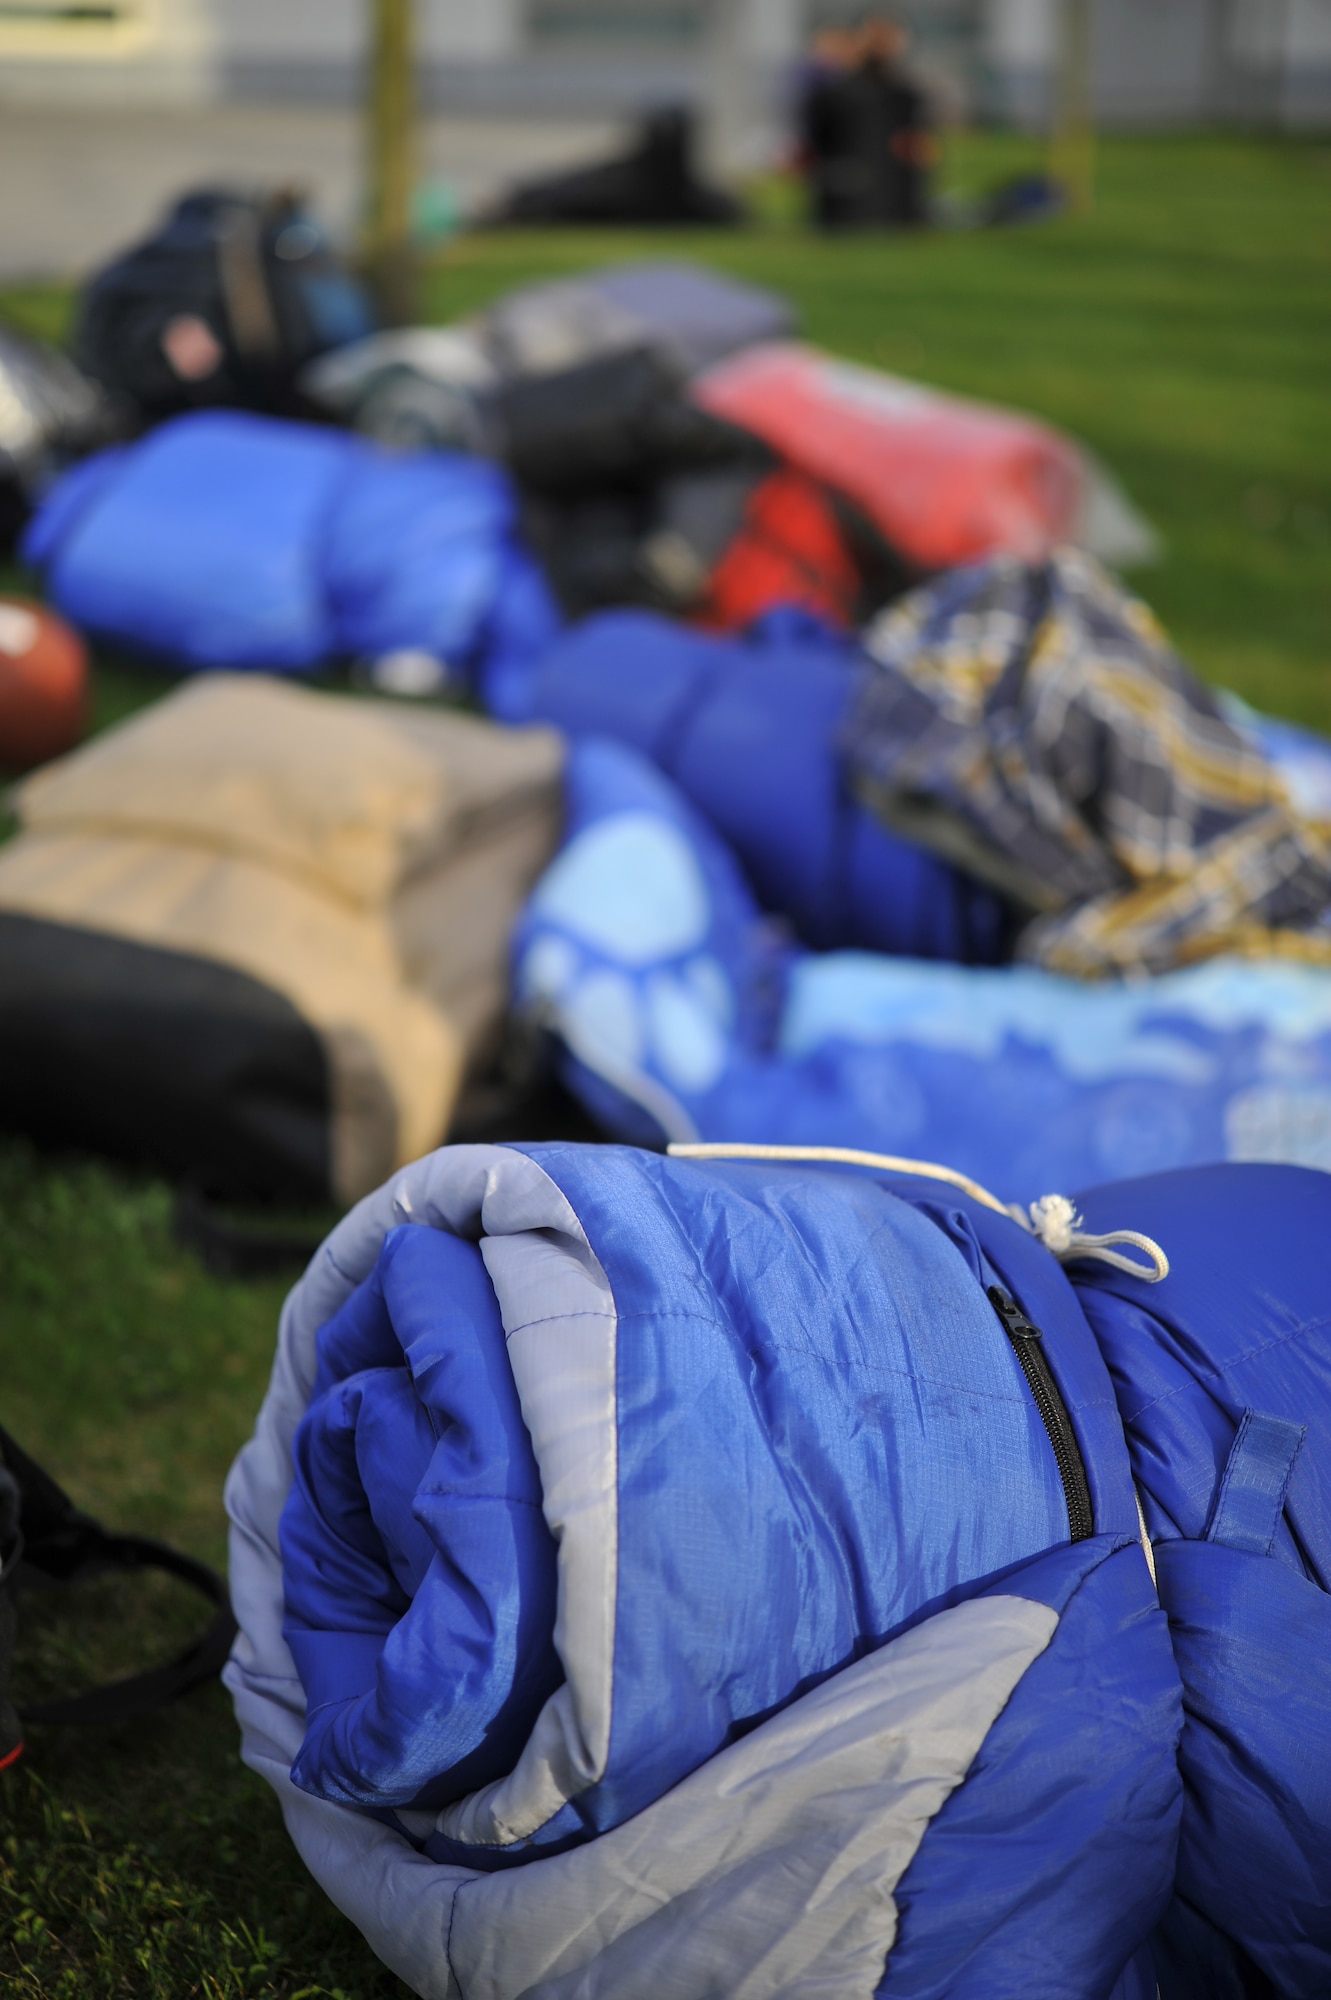 Sleeping bags and backpacks lay on the ground at the Solidarity Sleep Out event, April 19, 2013, Ramstein Air Base, Germany. The sleep out was organized by the Ramstein Keystone Club and was aimed at raising awareness for the homeless. (U.S. Air Force photo/Airman 1st Class Trevor Rhynes)

